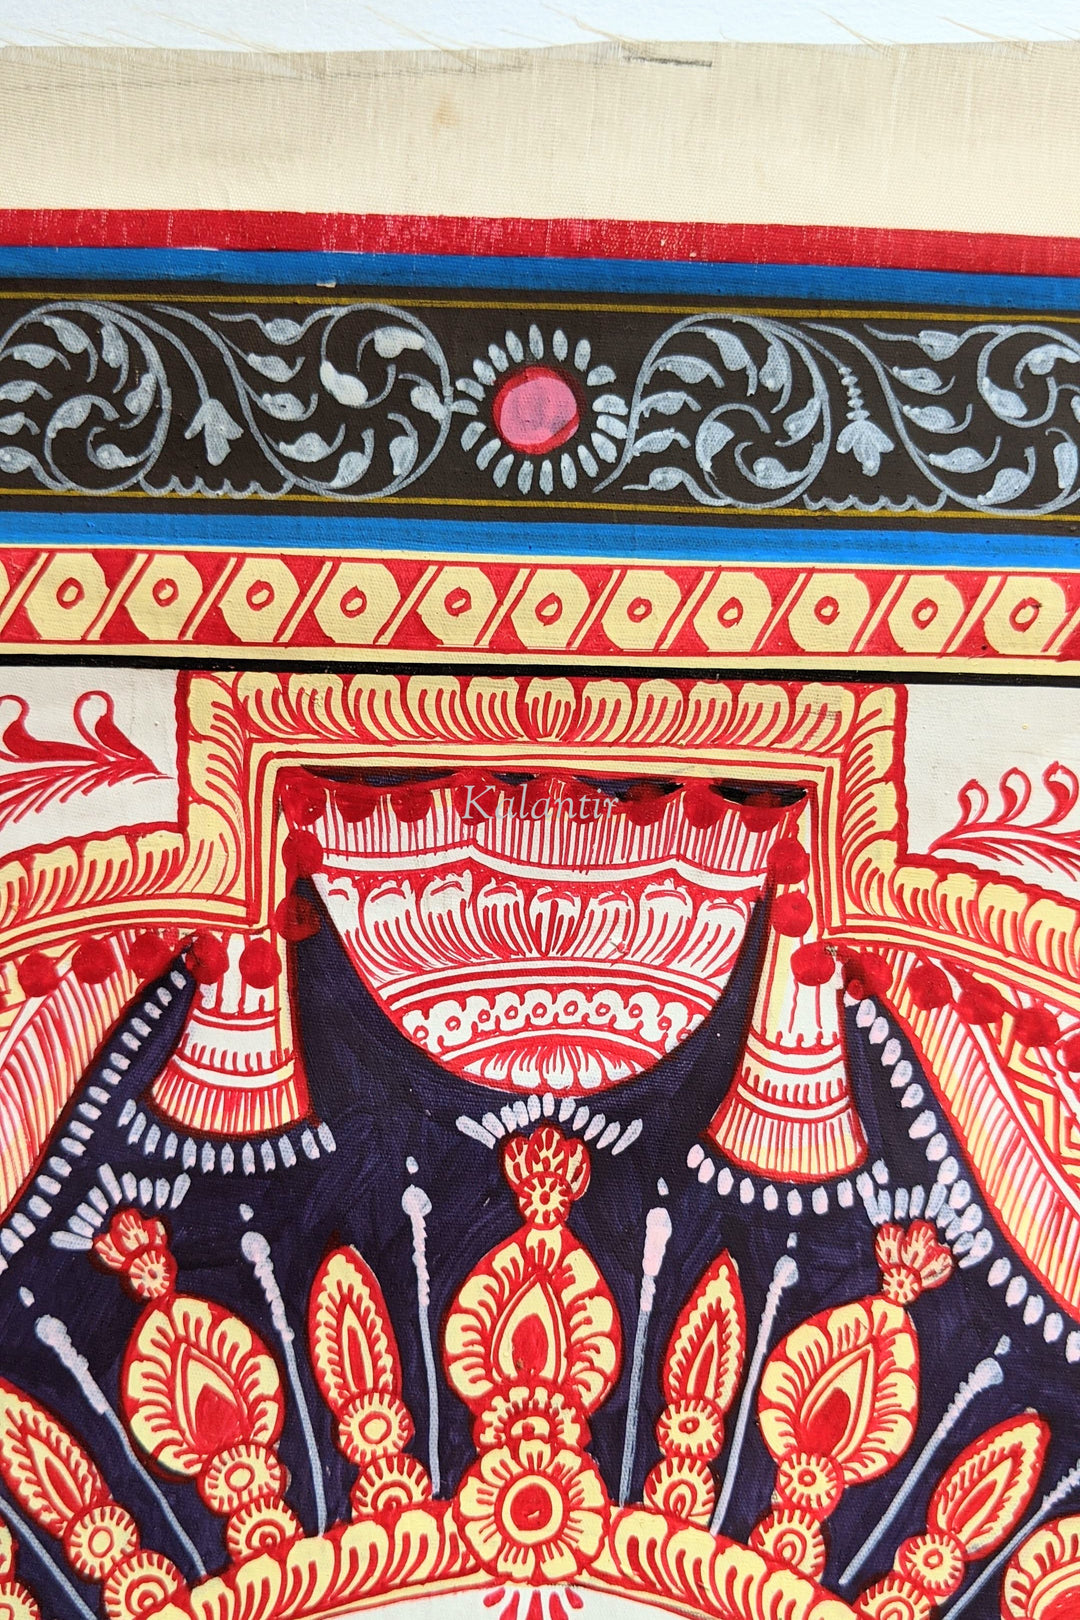 Beautiful Hand-Painting of Lord Jagannath in Purple